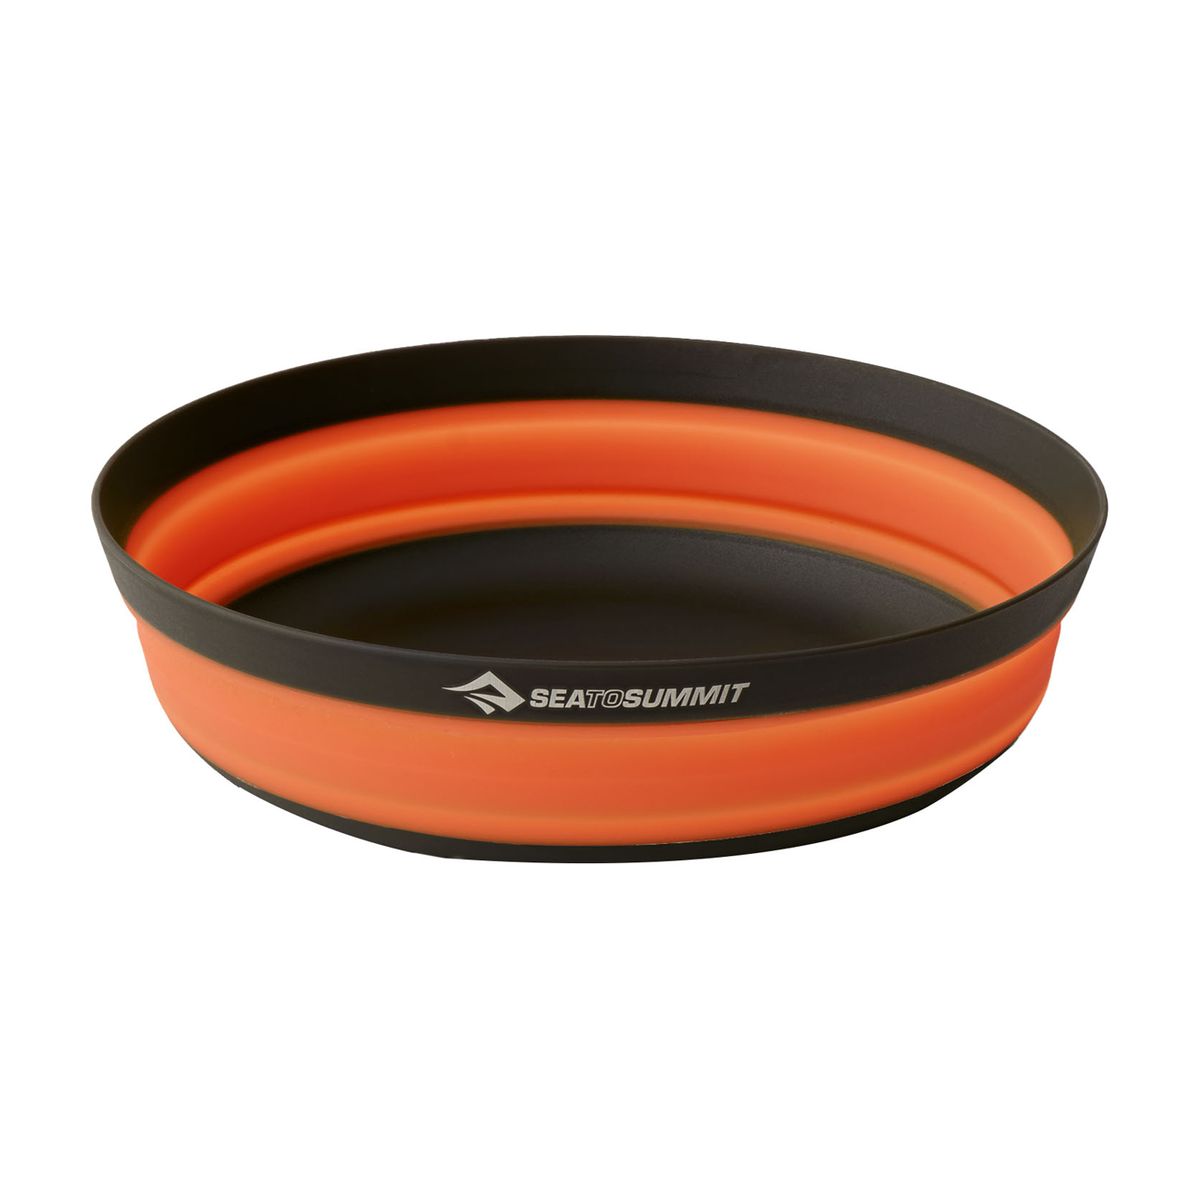 Frontier UL Collapsible Bowl L